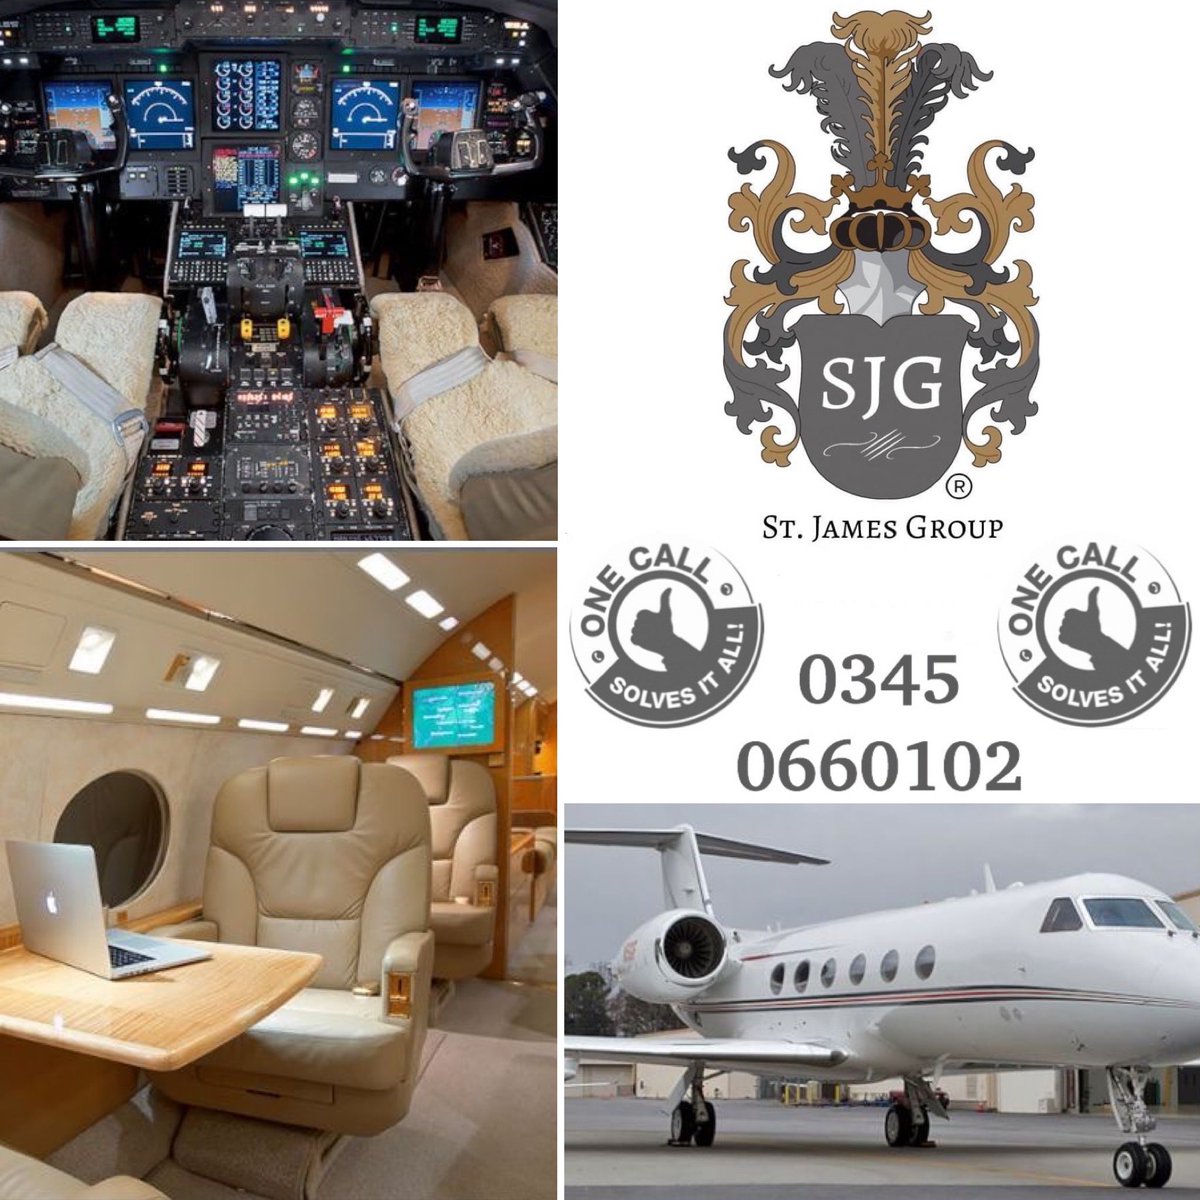 AVIATION SERVICES - SALES 

#privatecharter #privatejets #aviation #sales #privatejetlife  #businessjets #corporatejet #jet #aviationlovers #flyprivate #privateaviation #gulfstream #aircraft #pilot #airplane #falcon #aviationdaily #jetlife #cessna #bombardier #privatejetsales